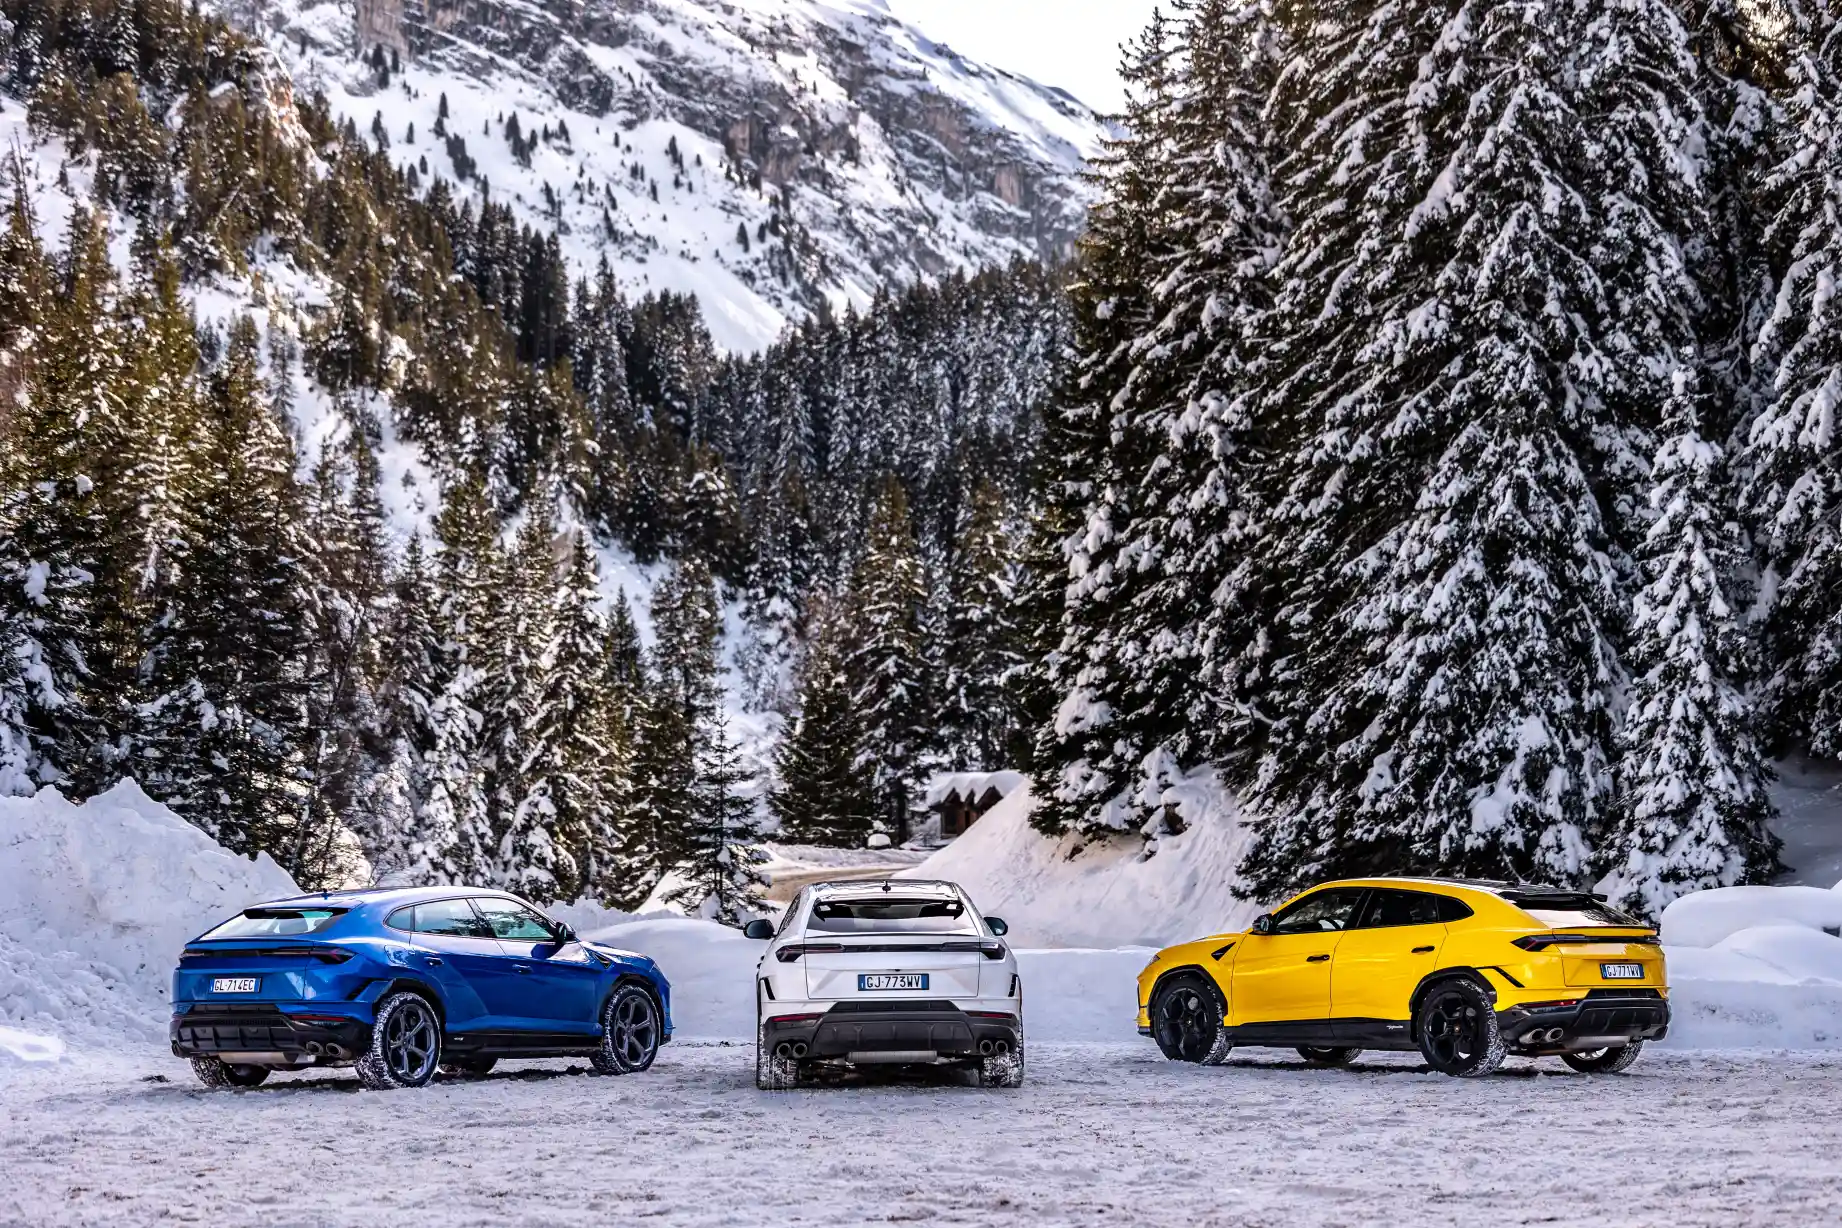 An exciting winter comes to an end for Automobili Lamborghini © Copyright PLPG GLOBAL MEDIA 2023